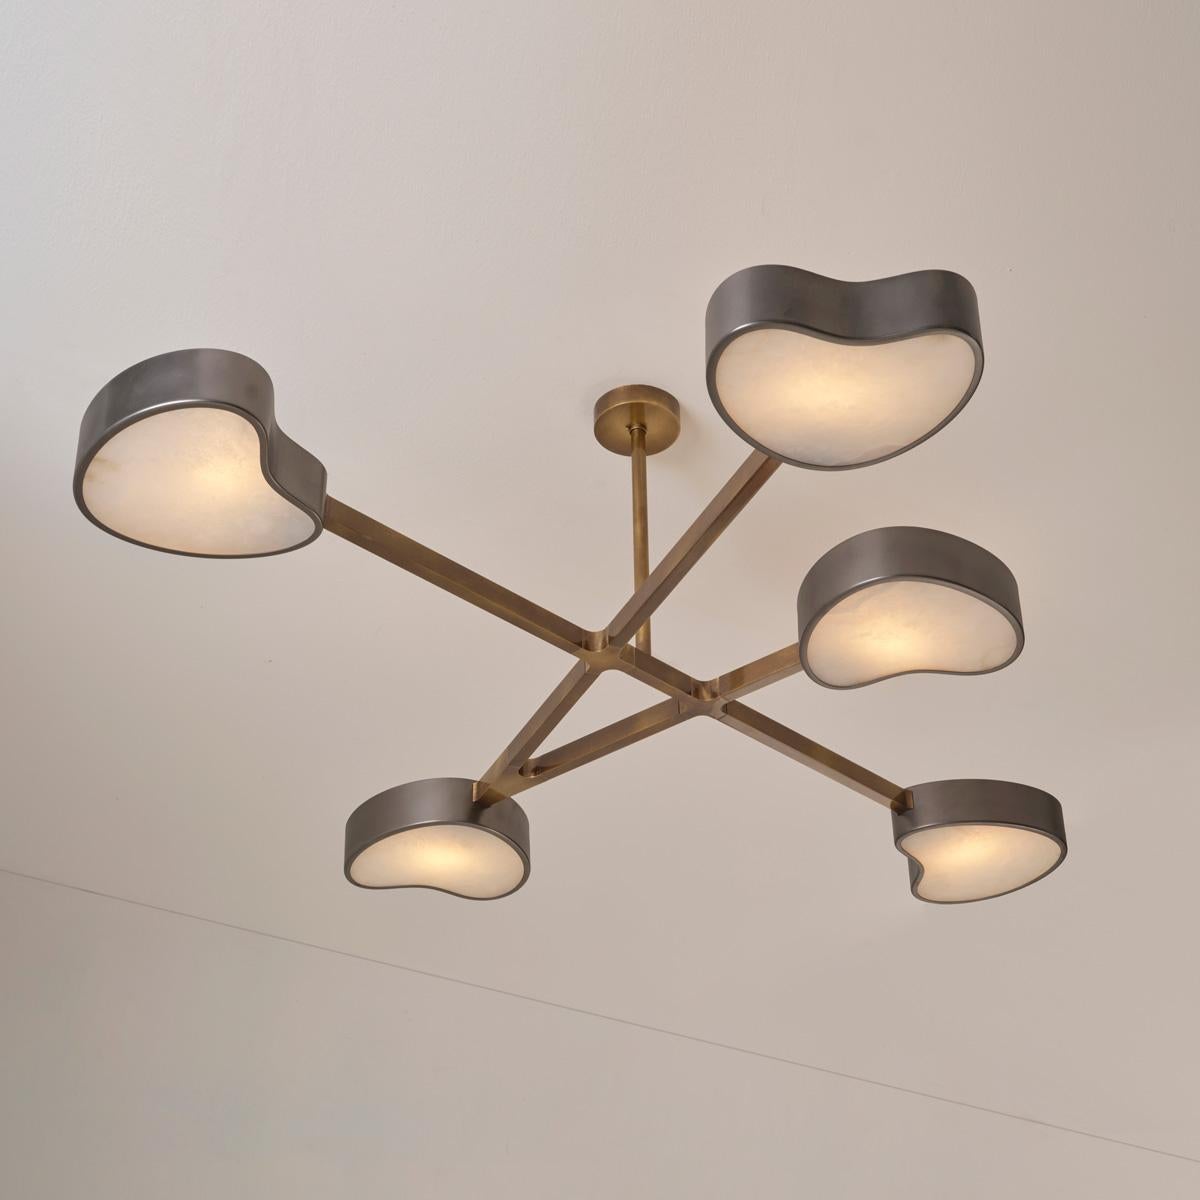 Cuore N.5 Ceiling Light by Gaspare Asaro. Satin Brass and Sand White Finish In New Condition For Sale In New York, NY